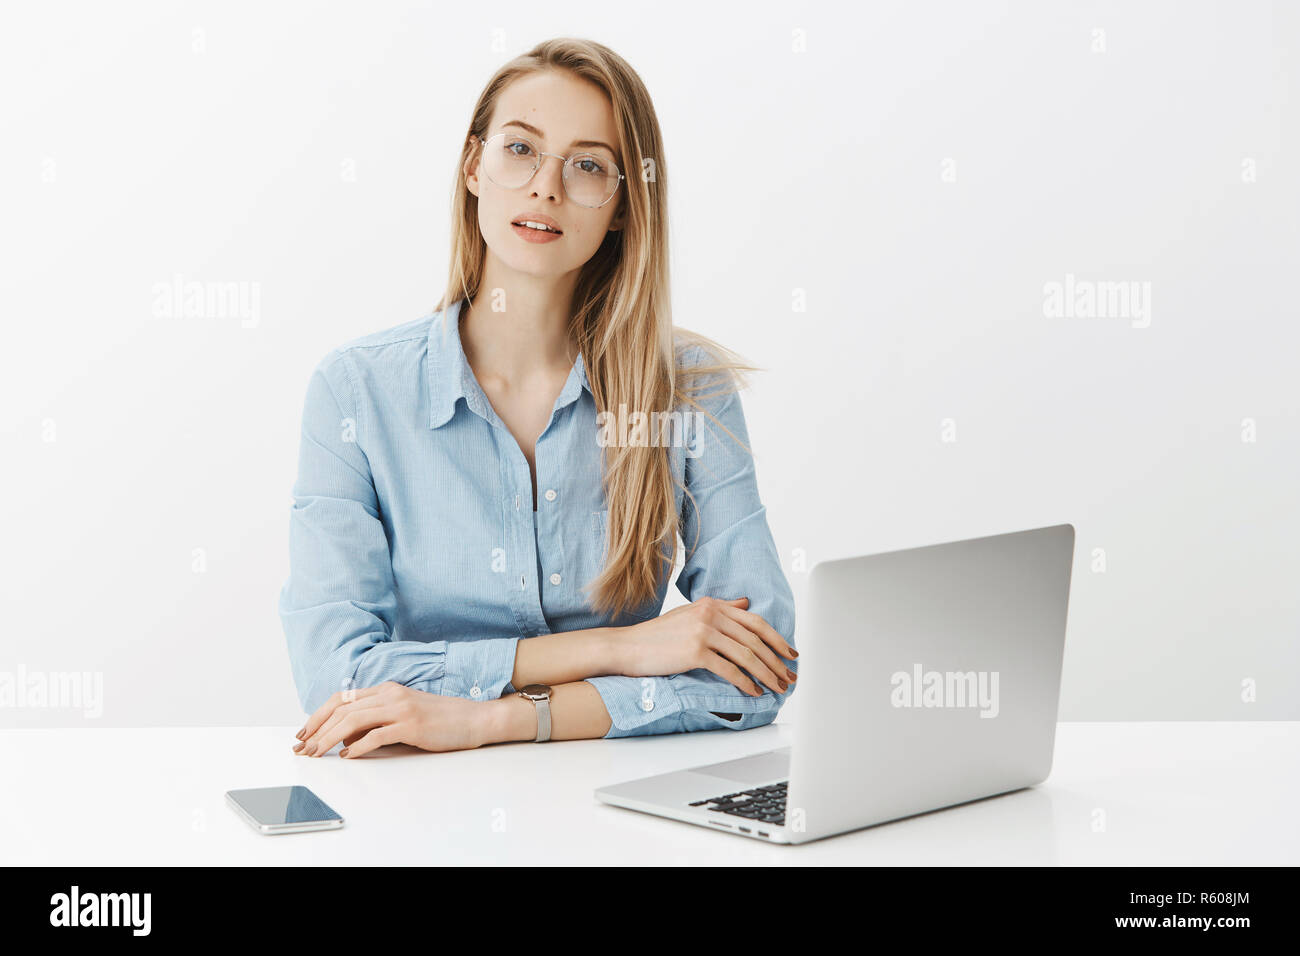 Hardworking smart and talanted female freelancer working hard on new project sitting near laptop and smartphone wearing glasses and watch looking at c Stock Photo